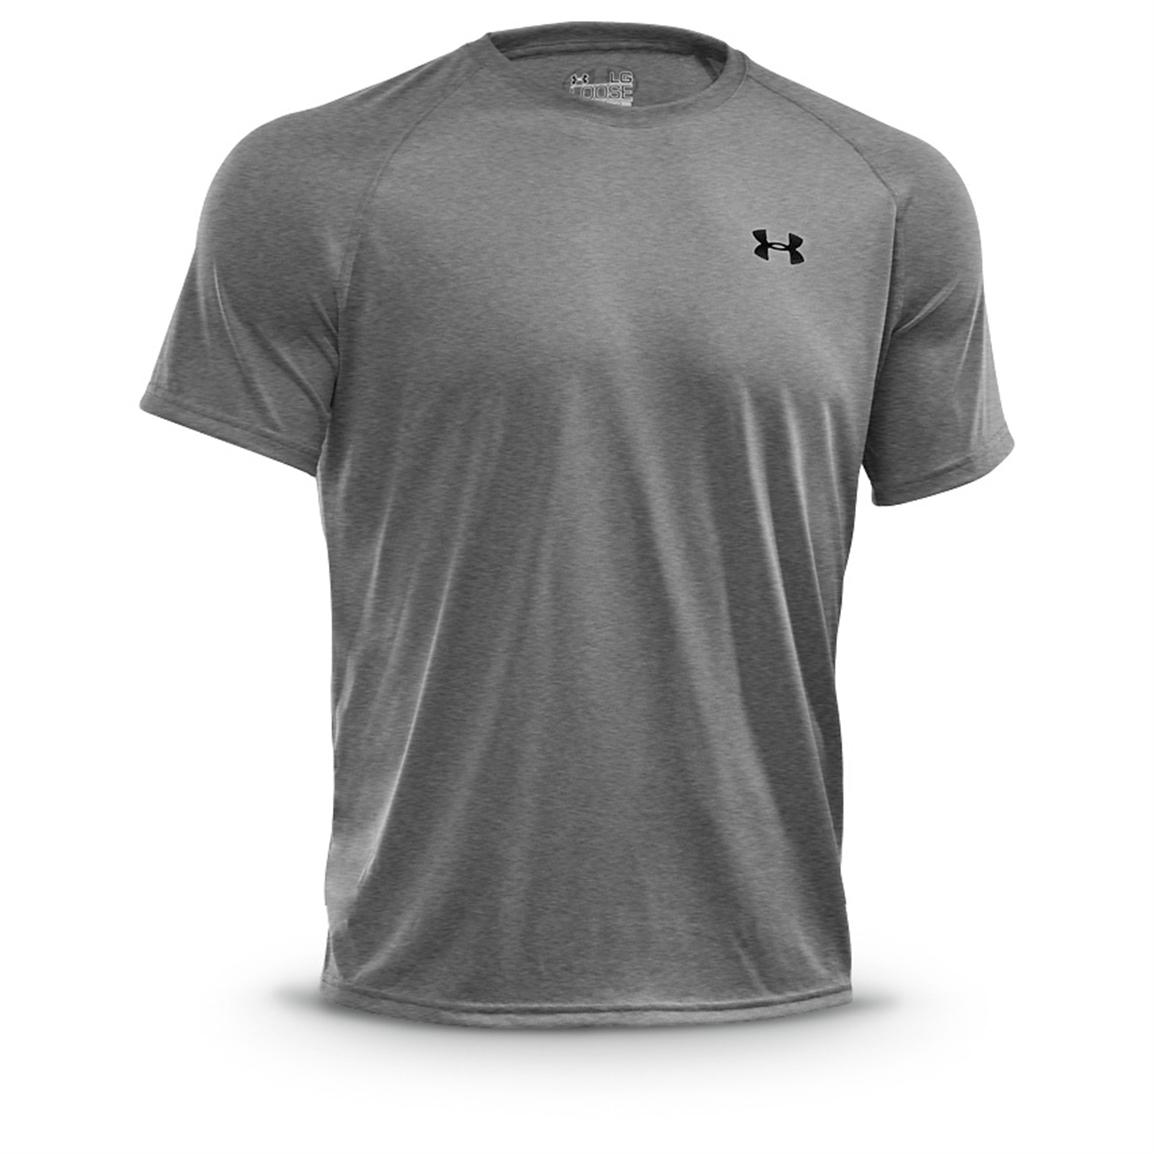 Buy gray under armour shirt - 53% OFF!